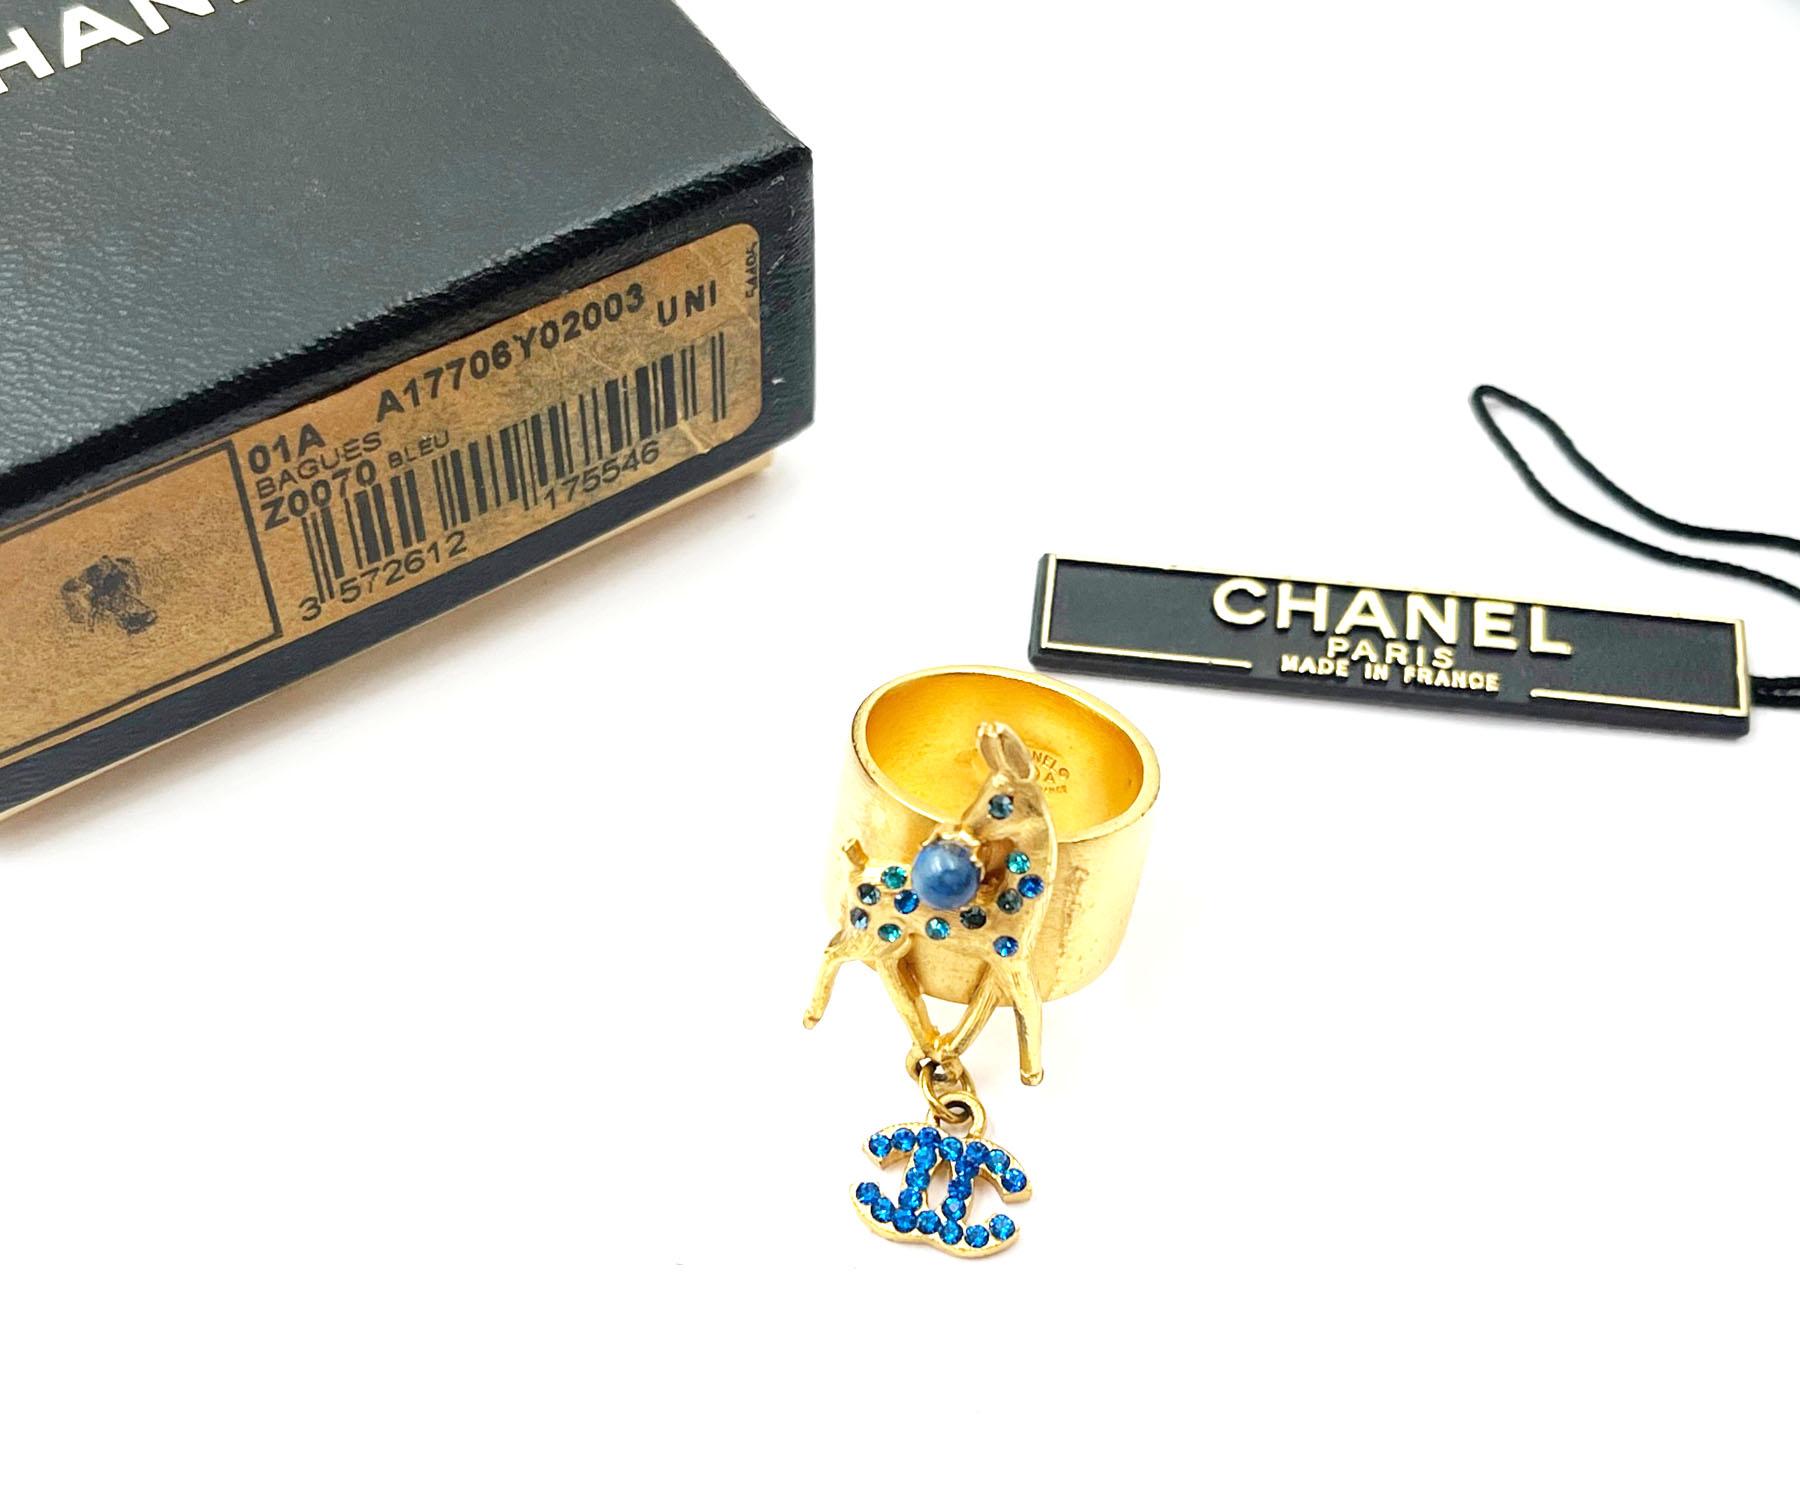 Chanel Rare Gold Plated Blue CC Bambi Deer Ring

*Marked 01
*Made in France
*Comes with the original box, barcode tag and tag

-It is approximately size 7.
-Bambi and CC logo is approximately 1.75